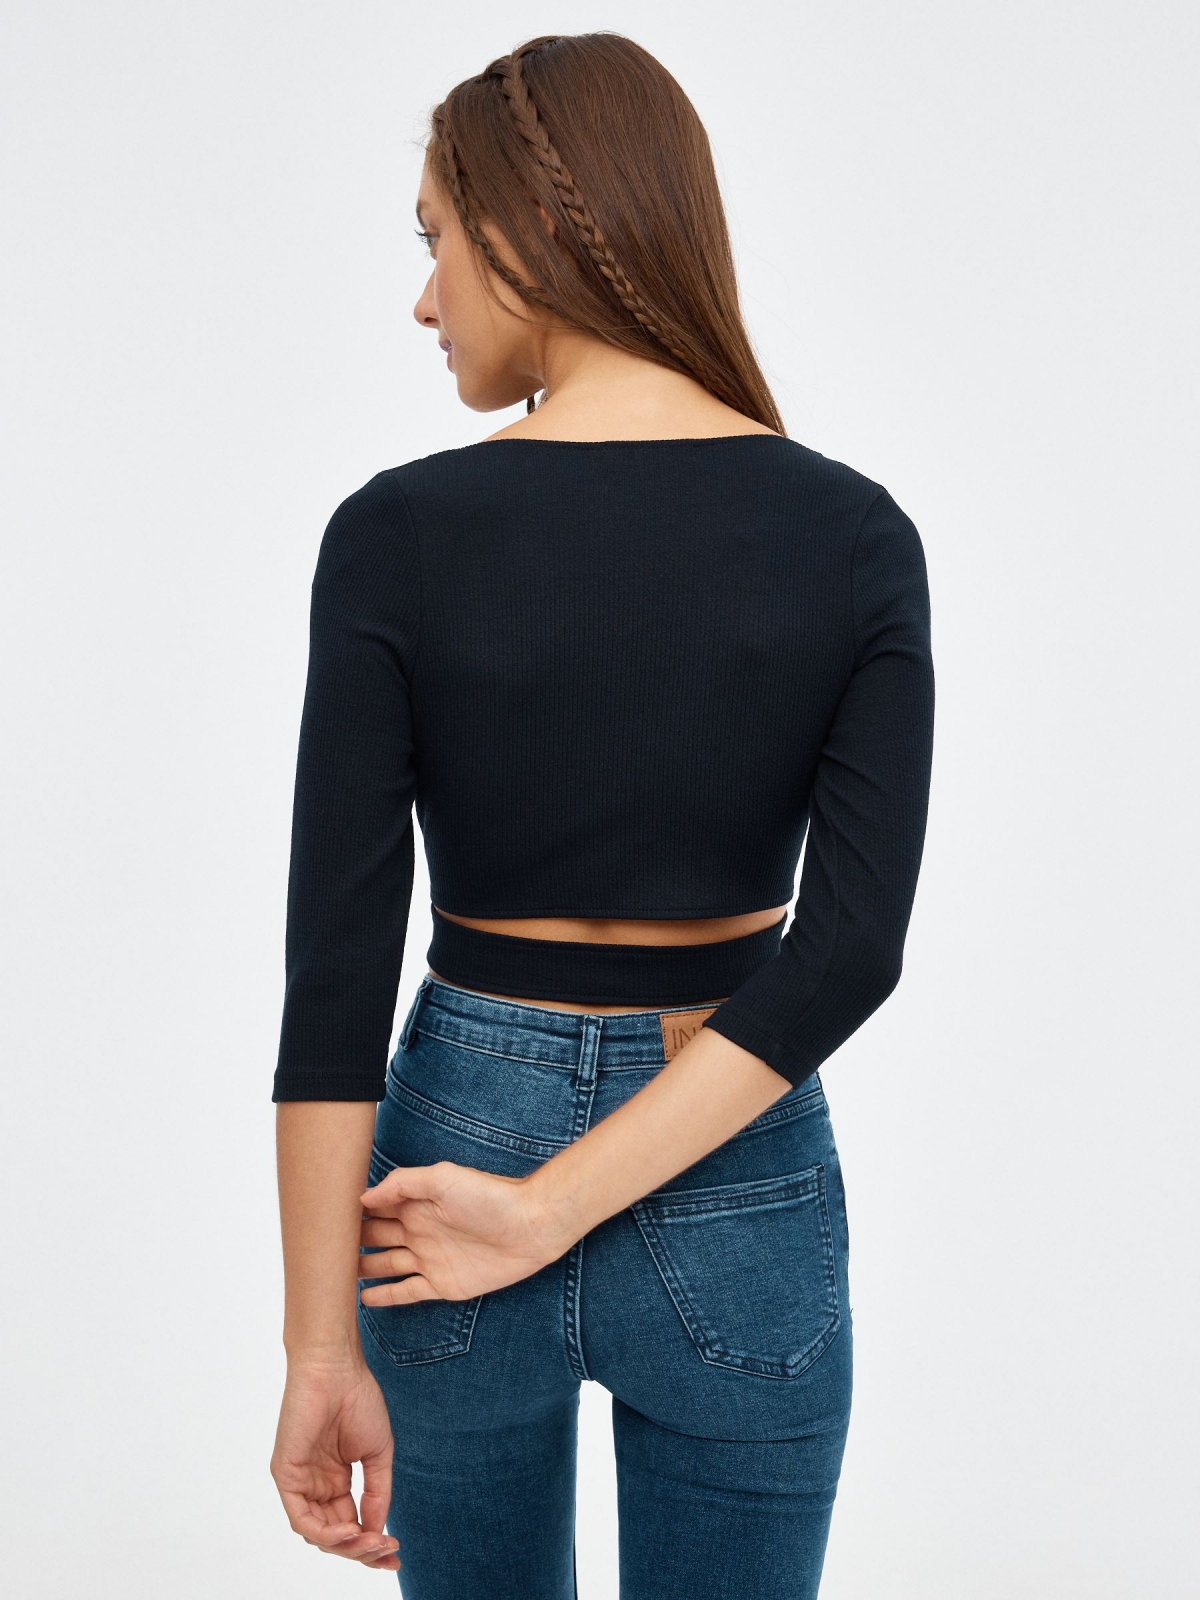 Crop top slim crossover black middle back view